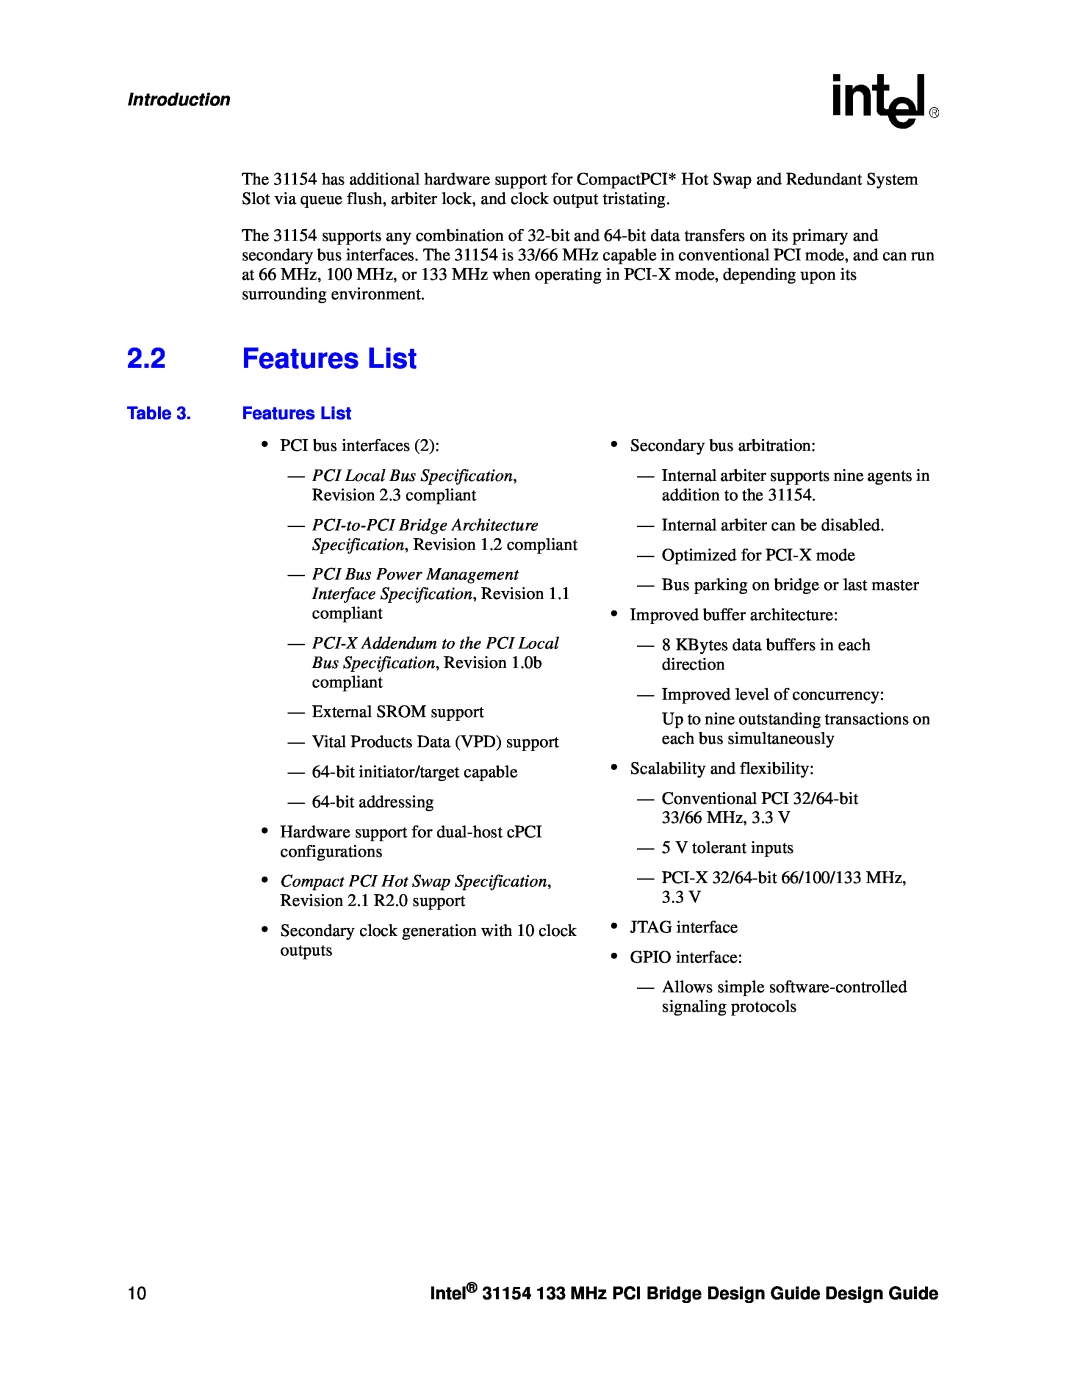 Intel 31154 manual Features List, PCI Local Bus Specification, Revision 2.3 compliant, Introduction 